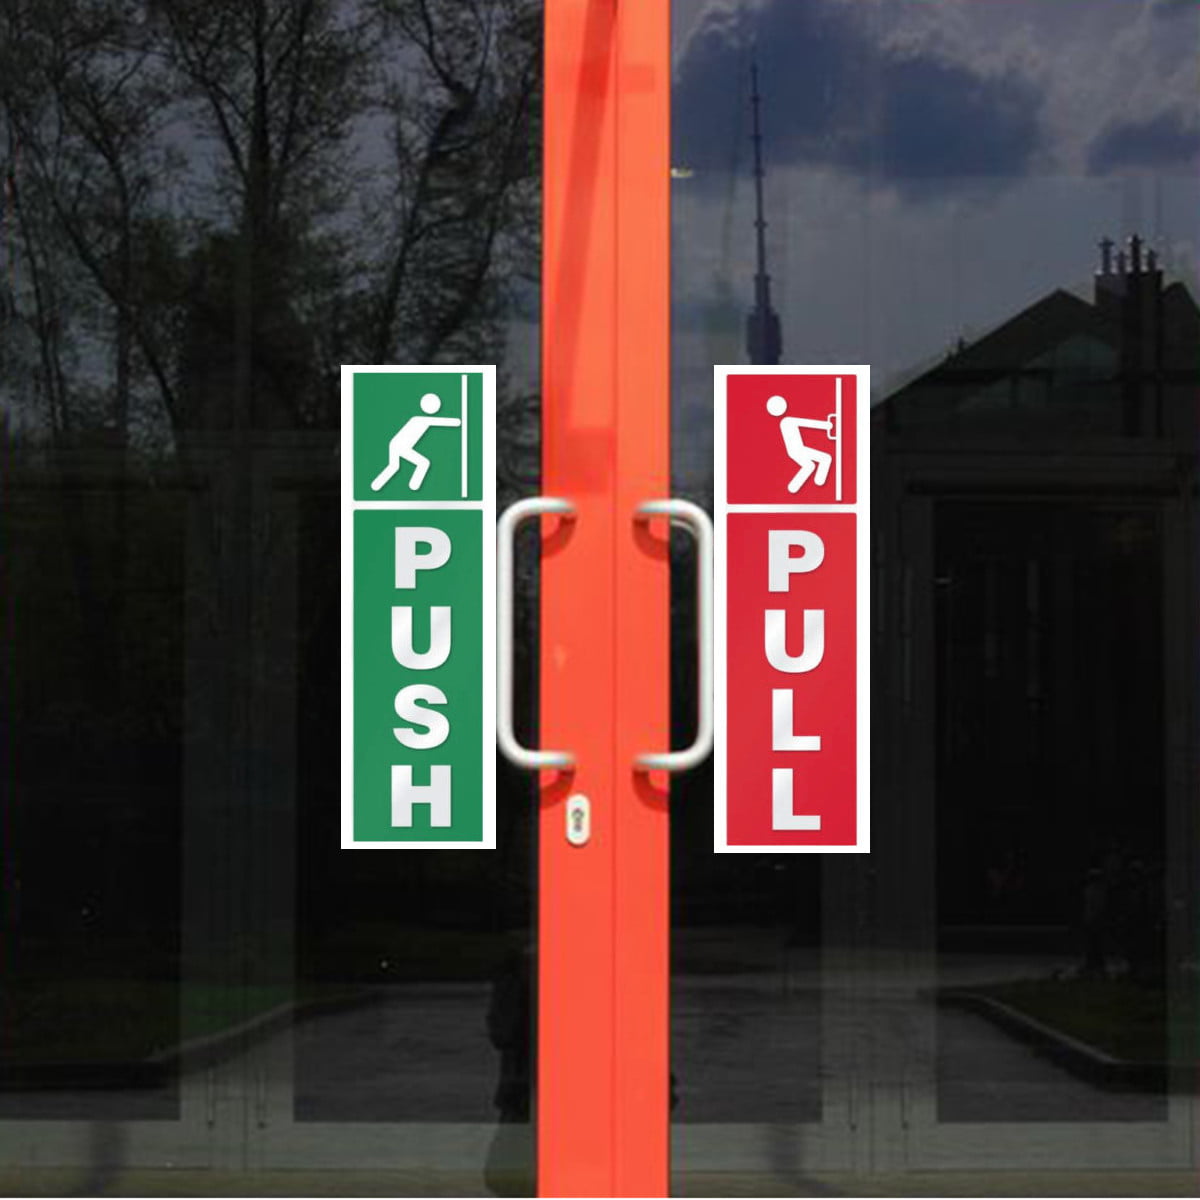 2x Green Push And Red Pull Door Window Vinyl Stickers Warning Signs